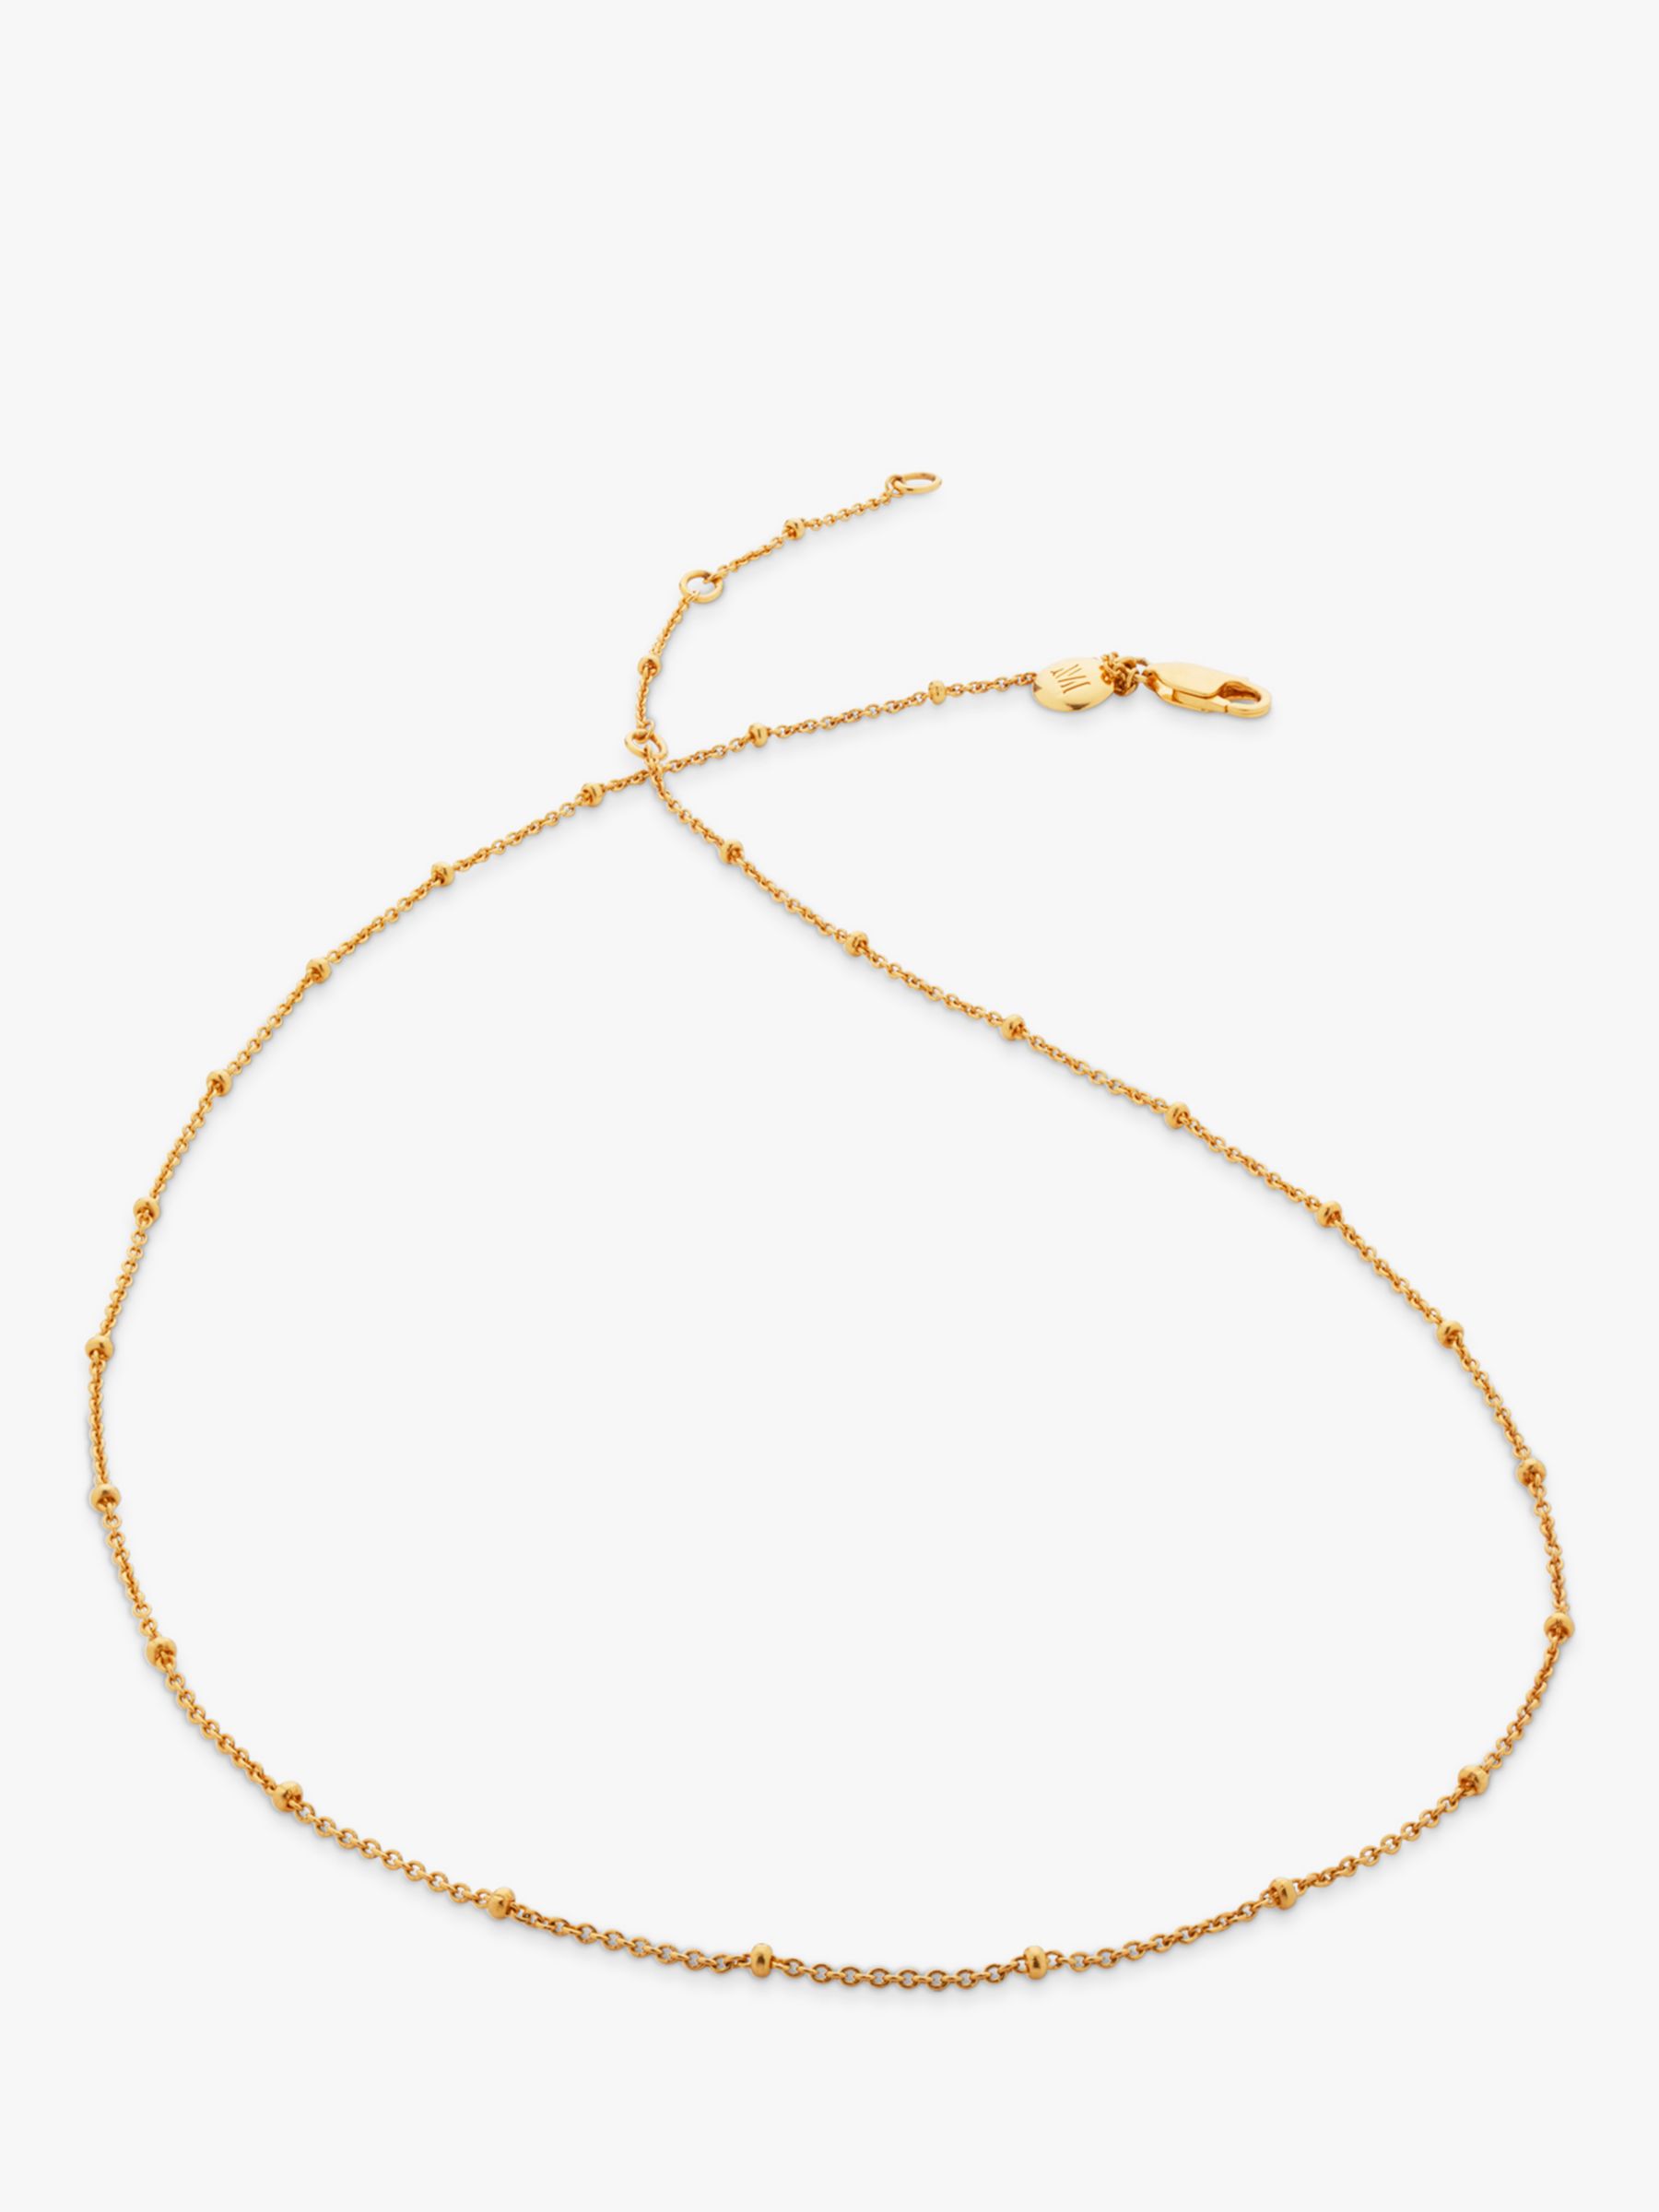 Monica Vinader Fine Beaded Chain with Nura Pearl Pendant, Gold